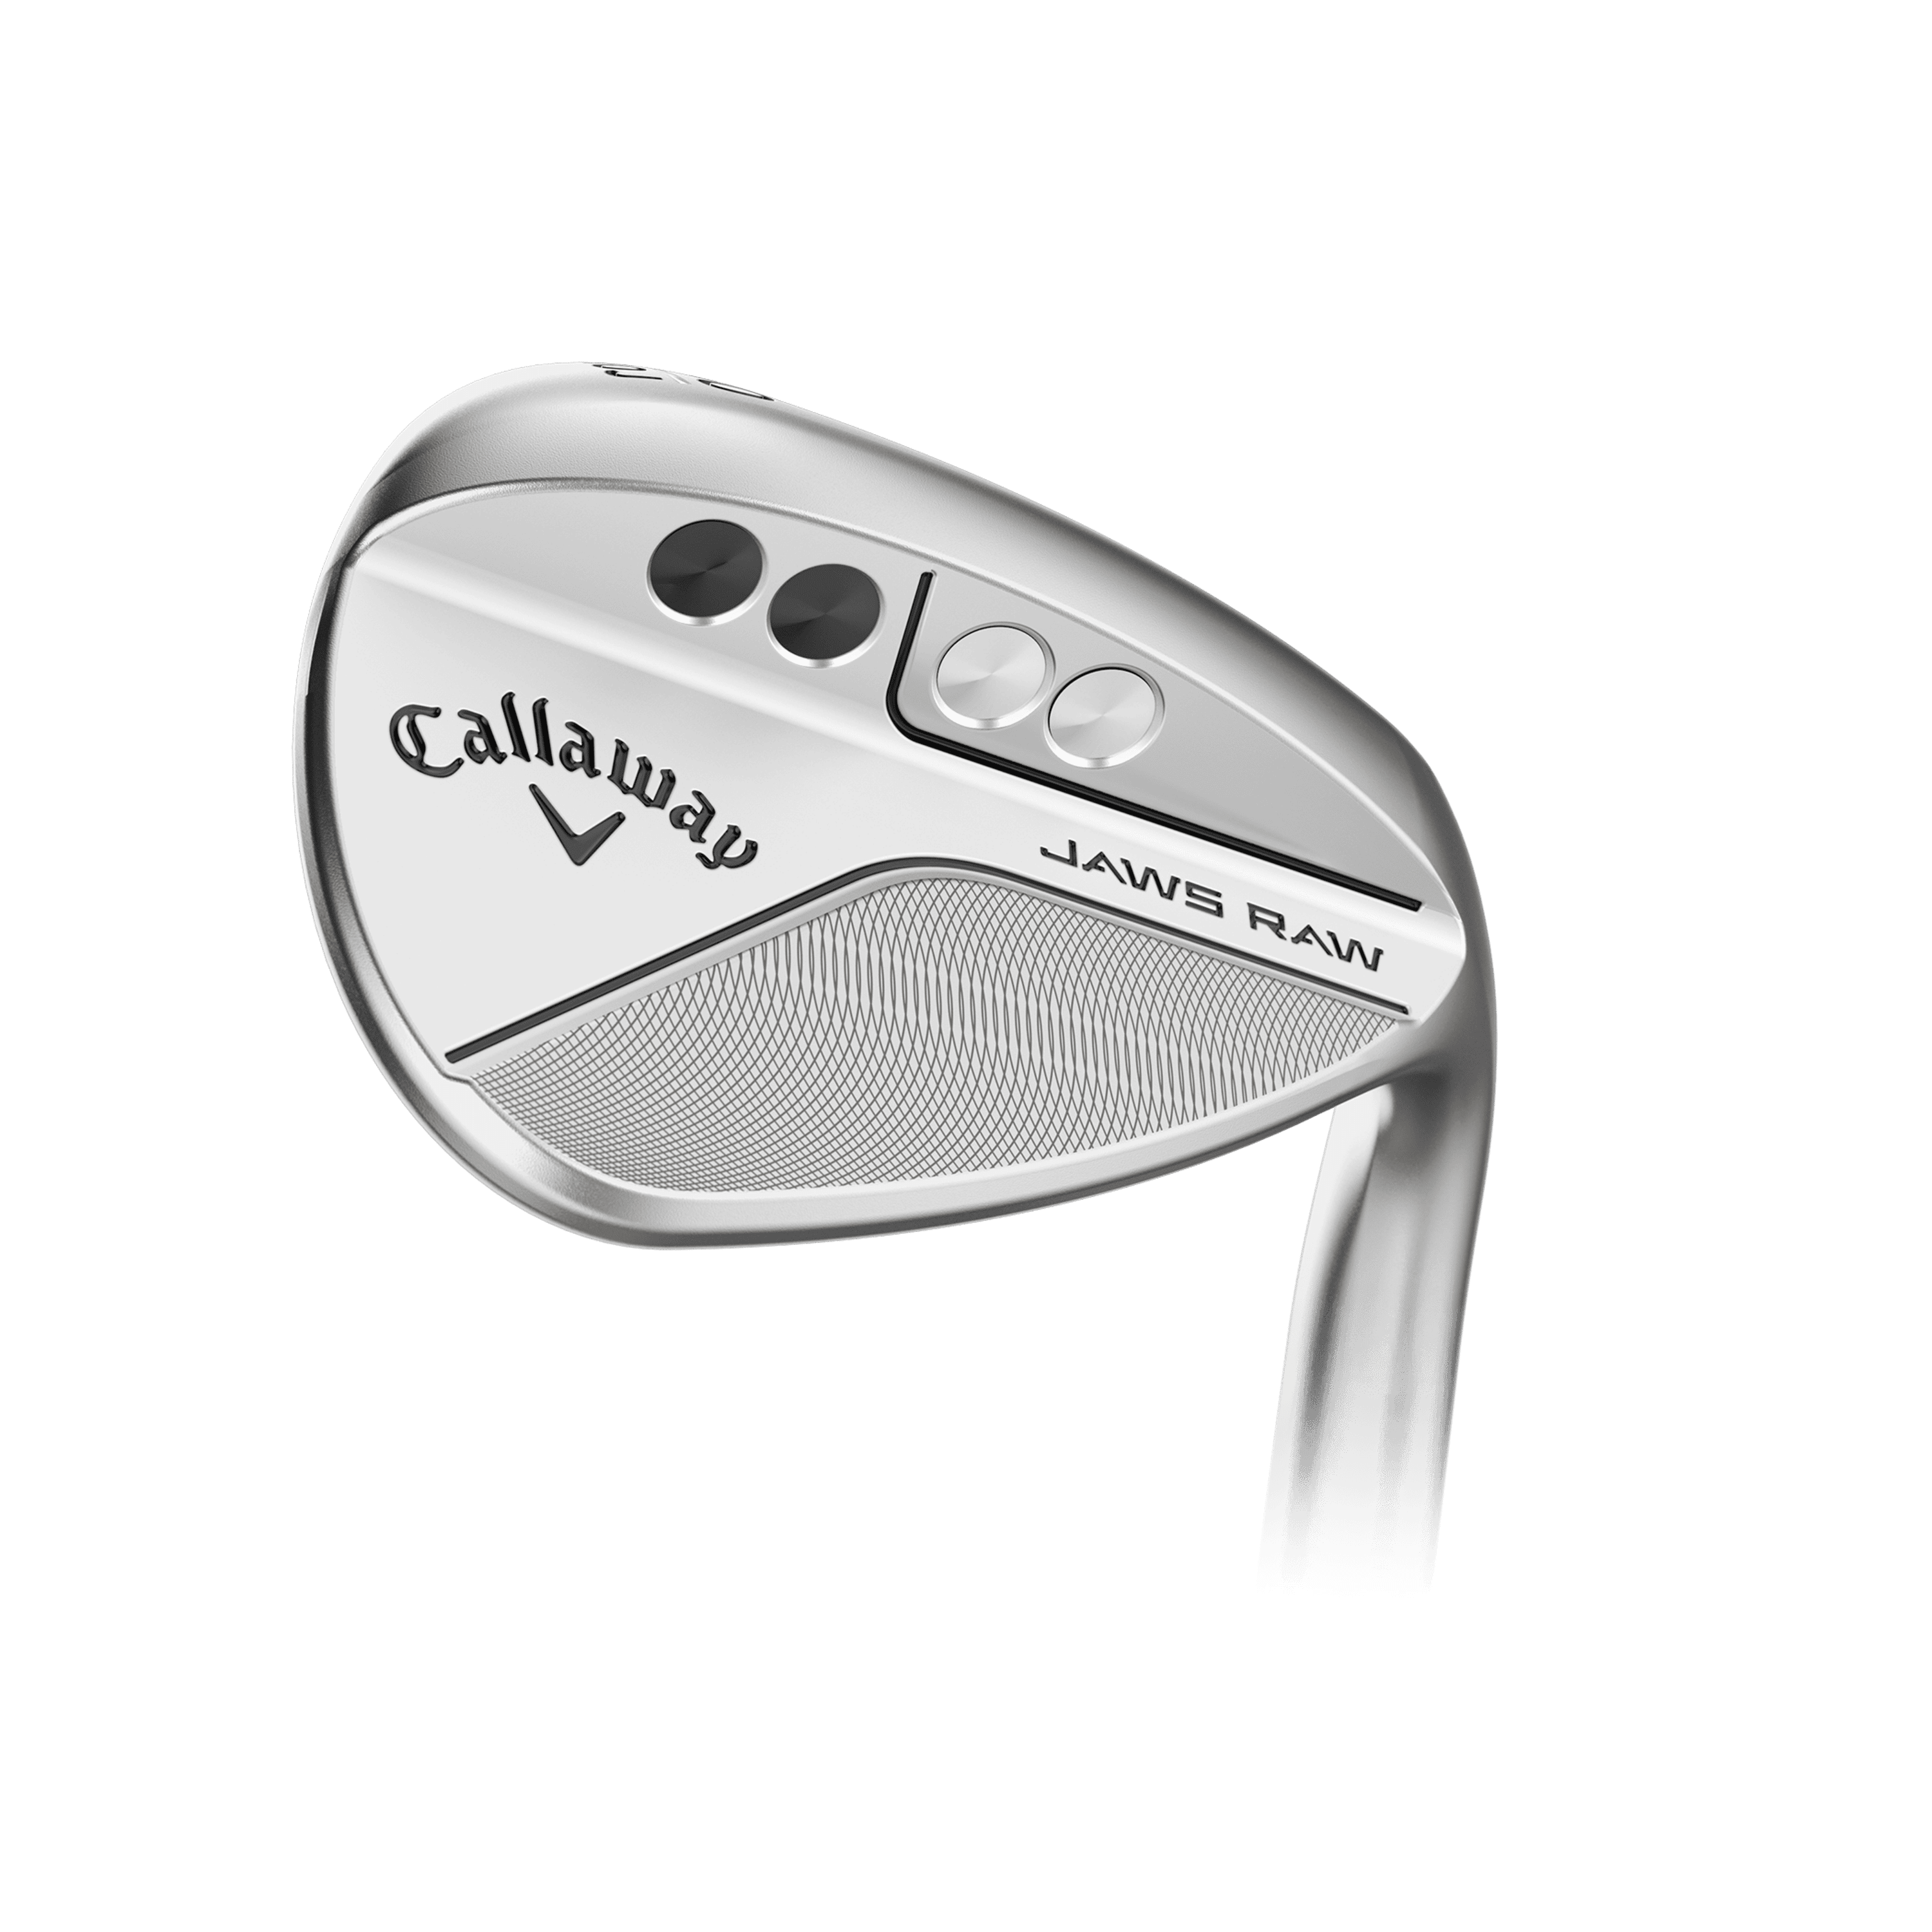 Weight Balanced Design for Enhanced Feel and Improved Scoring Performance